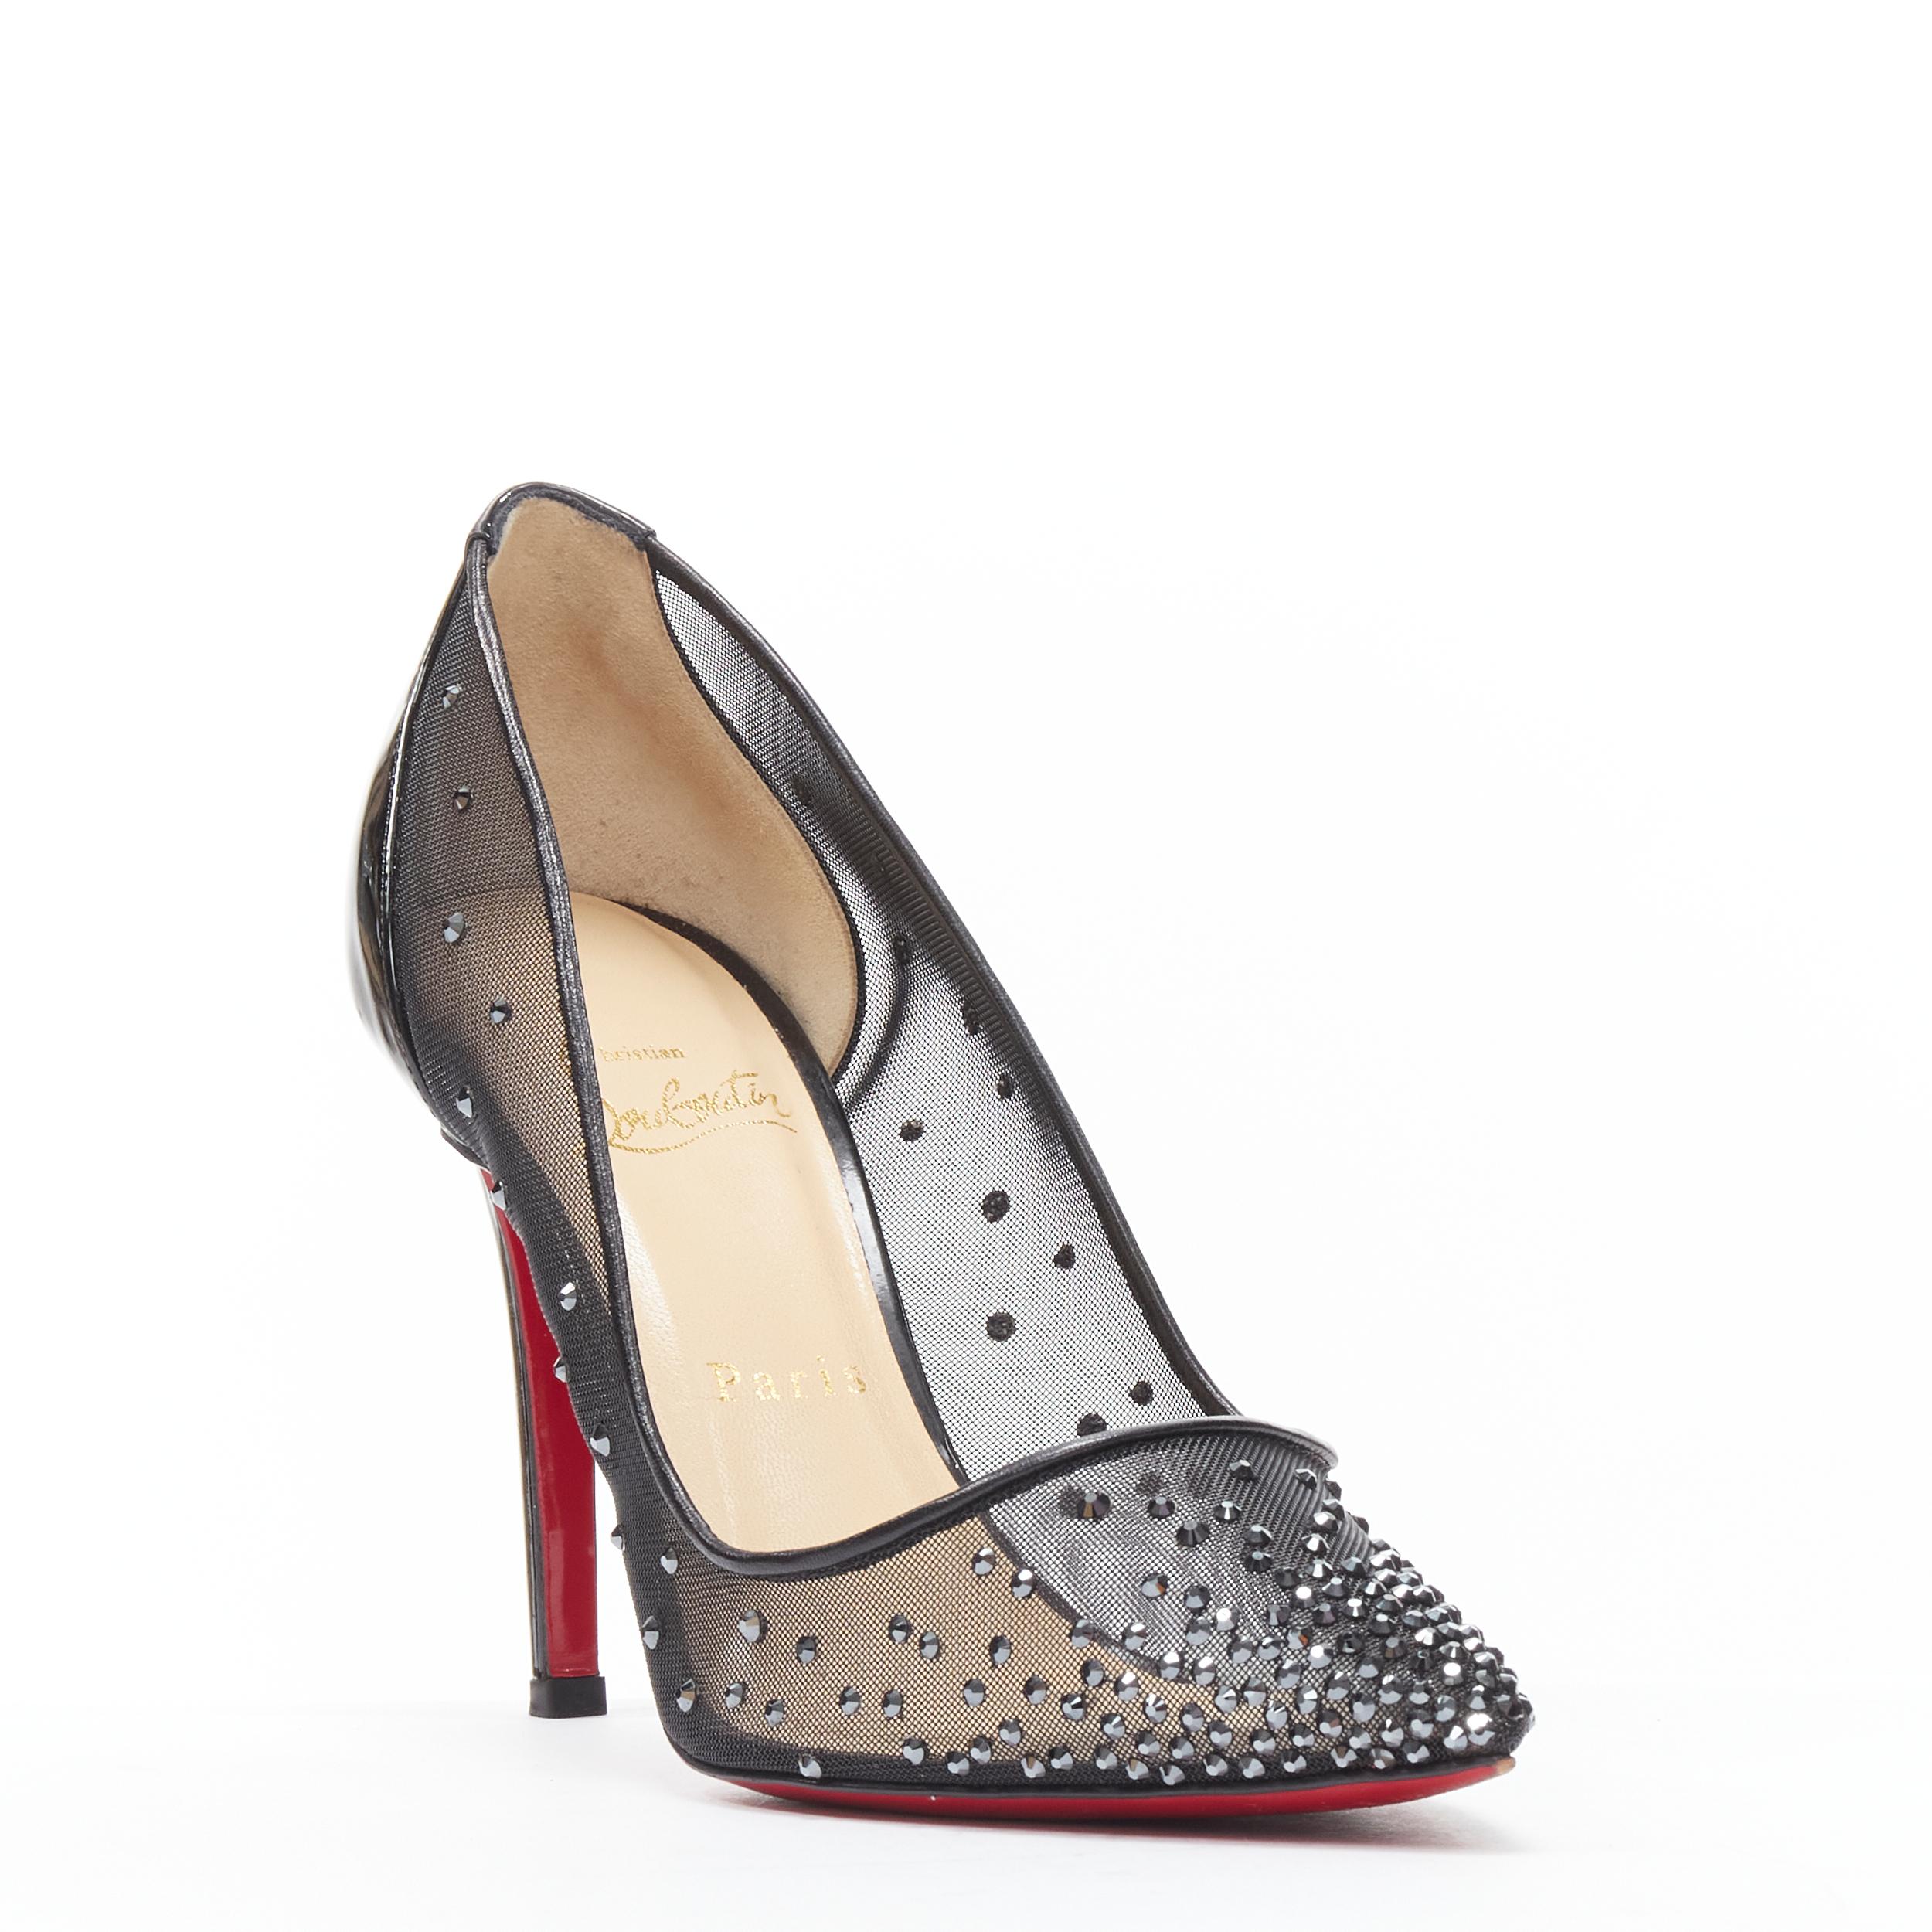 Louboutin Follies Strass - 6 For Sale on 1stDibs | follies strass crystal  mesh pumps, louboutin follies strass black, christian louboutin follies  strass crystal mesh pumps